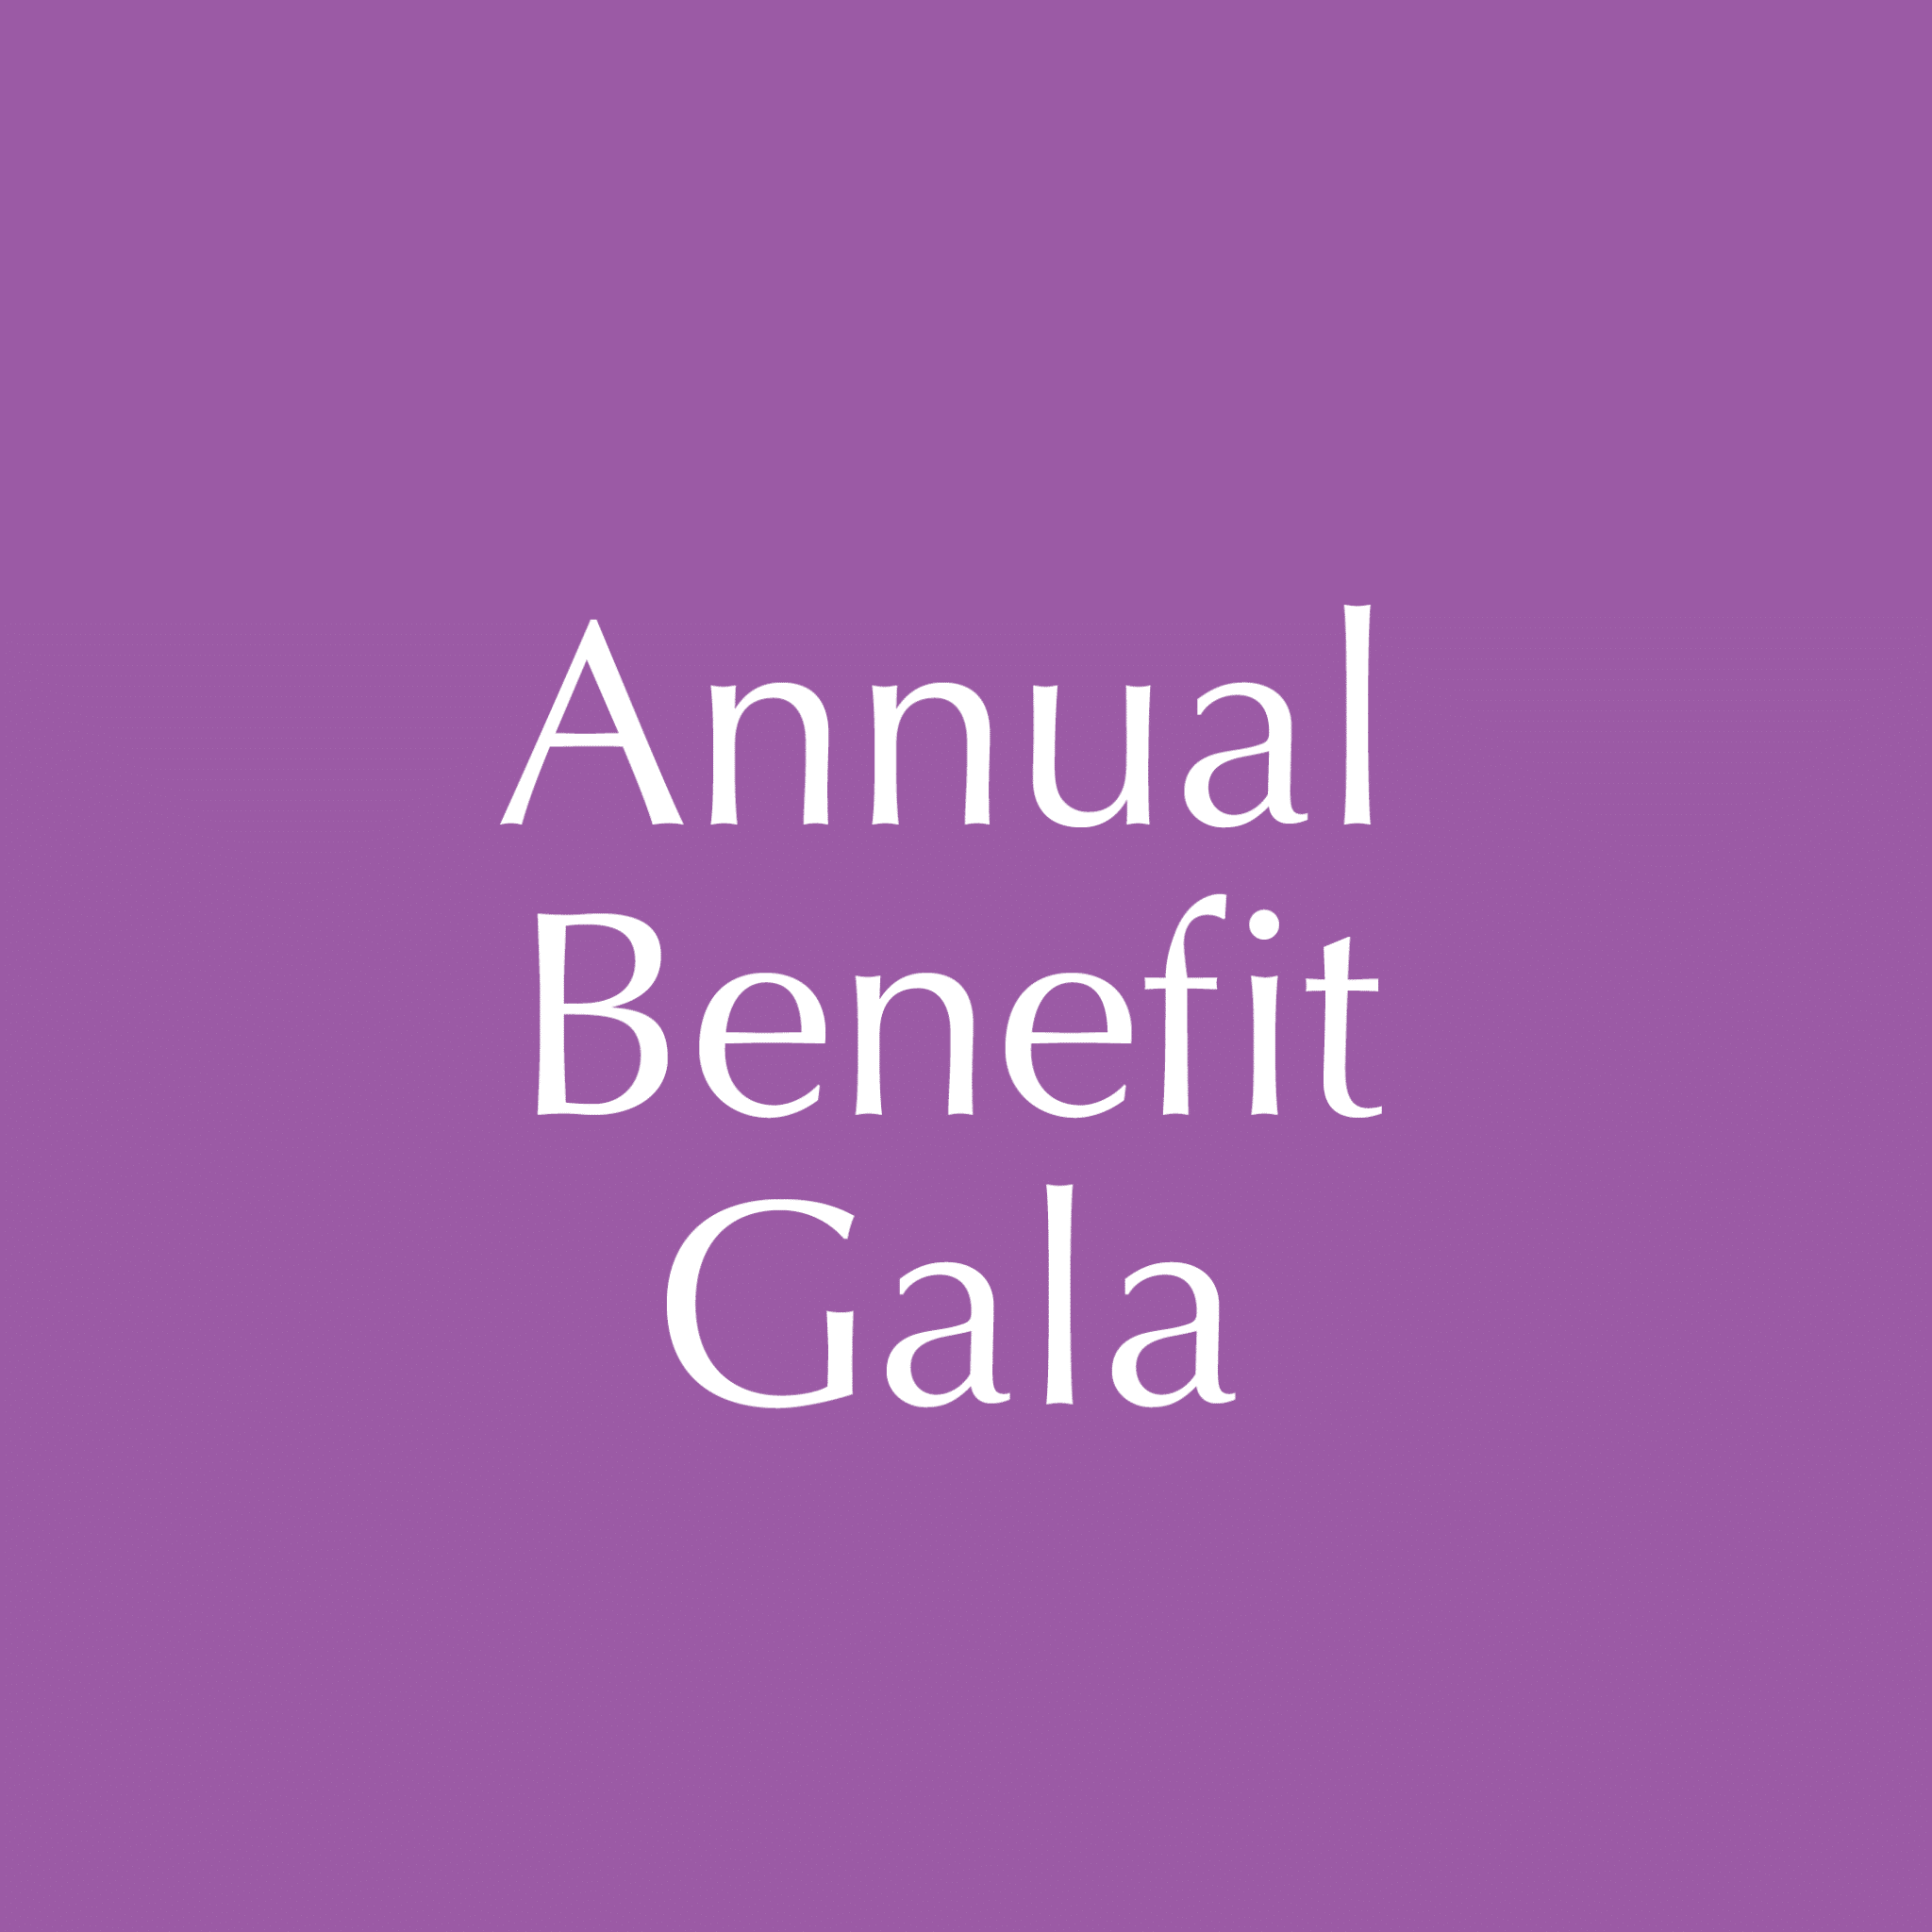 Annual Benefit Gala graphic